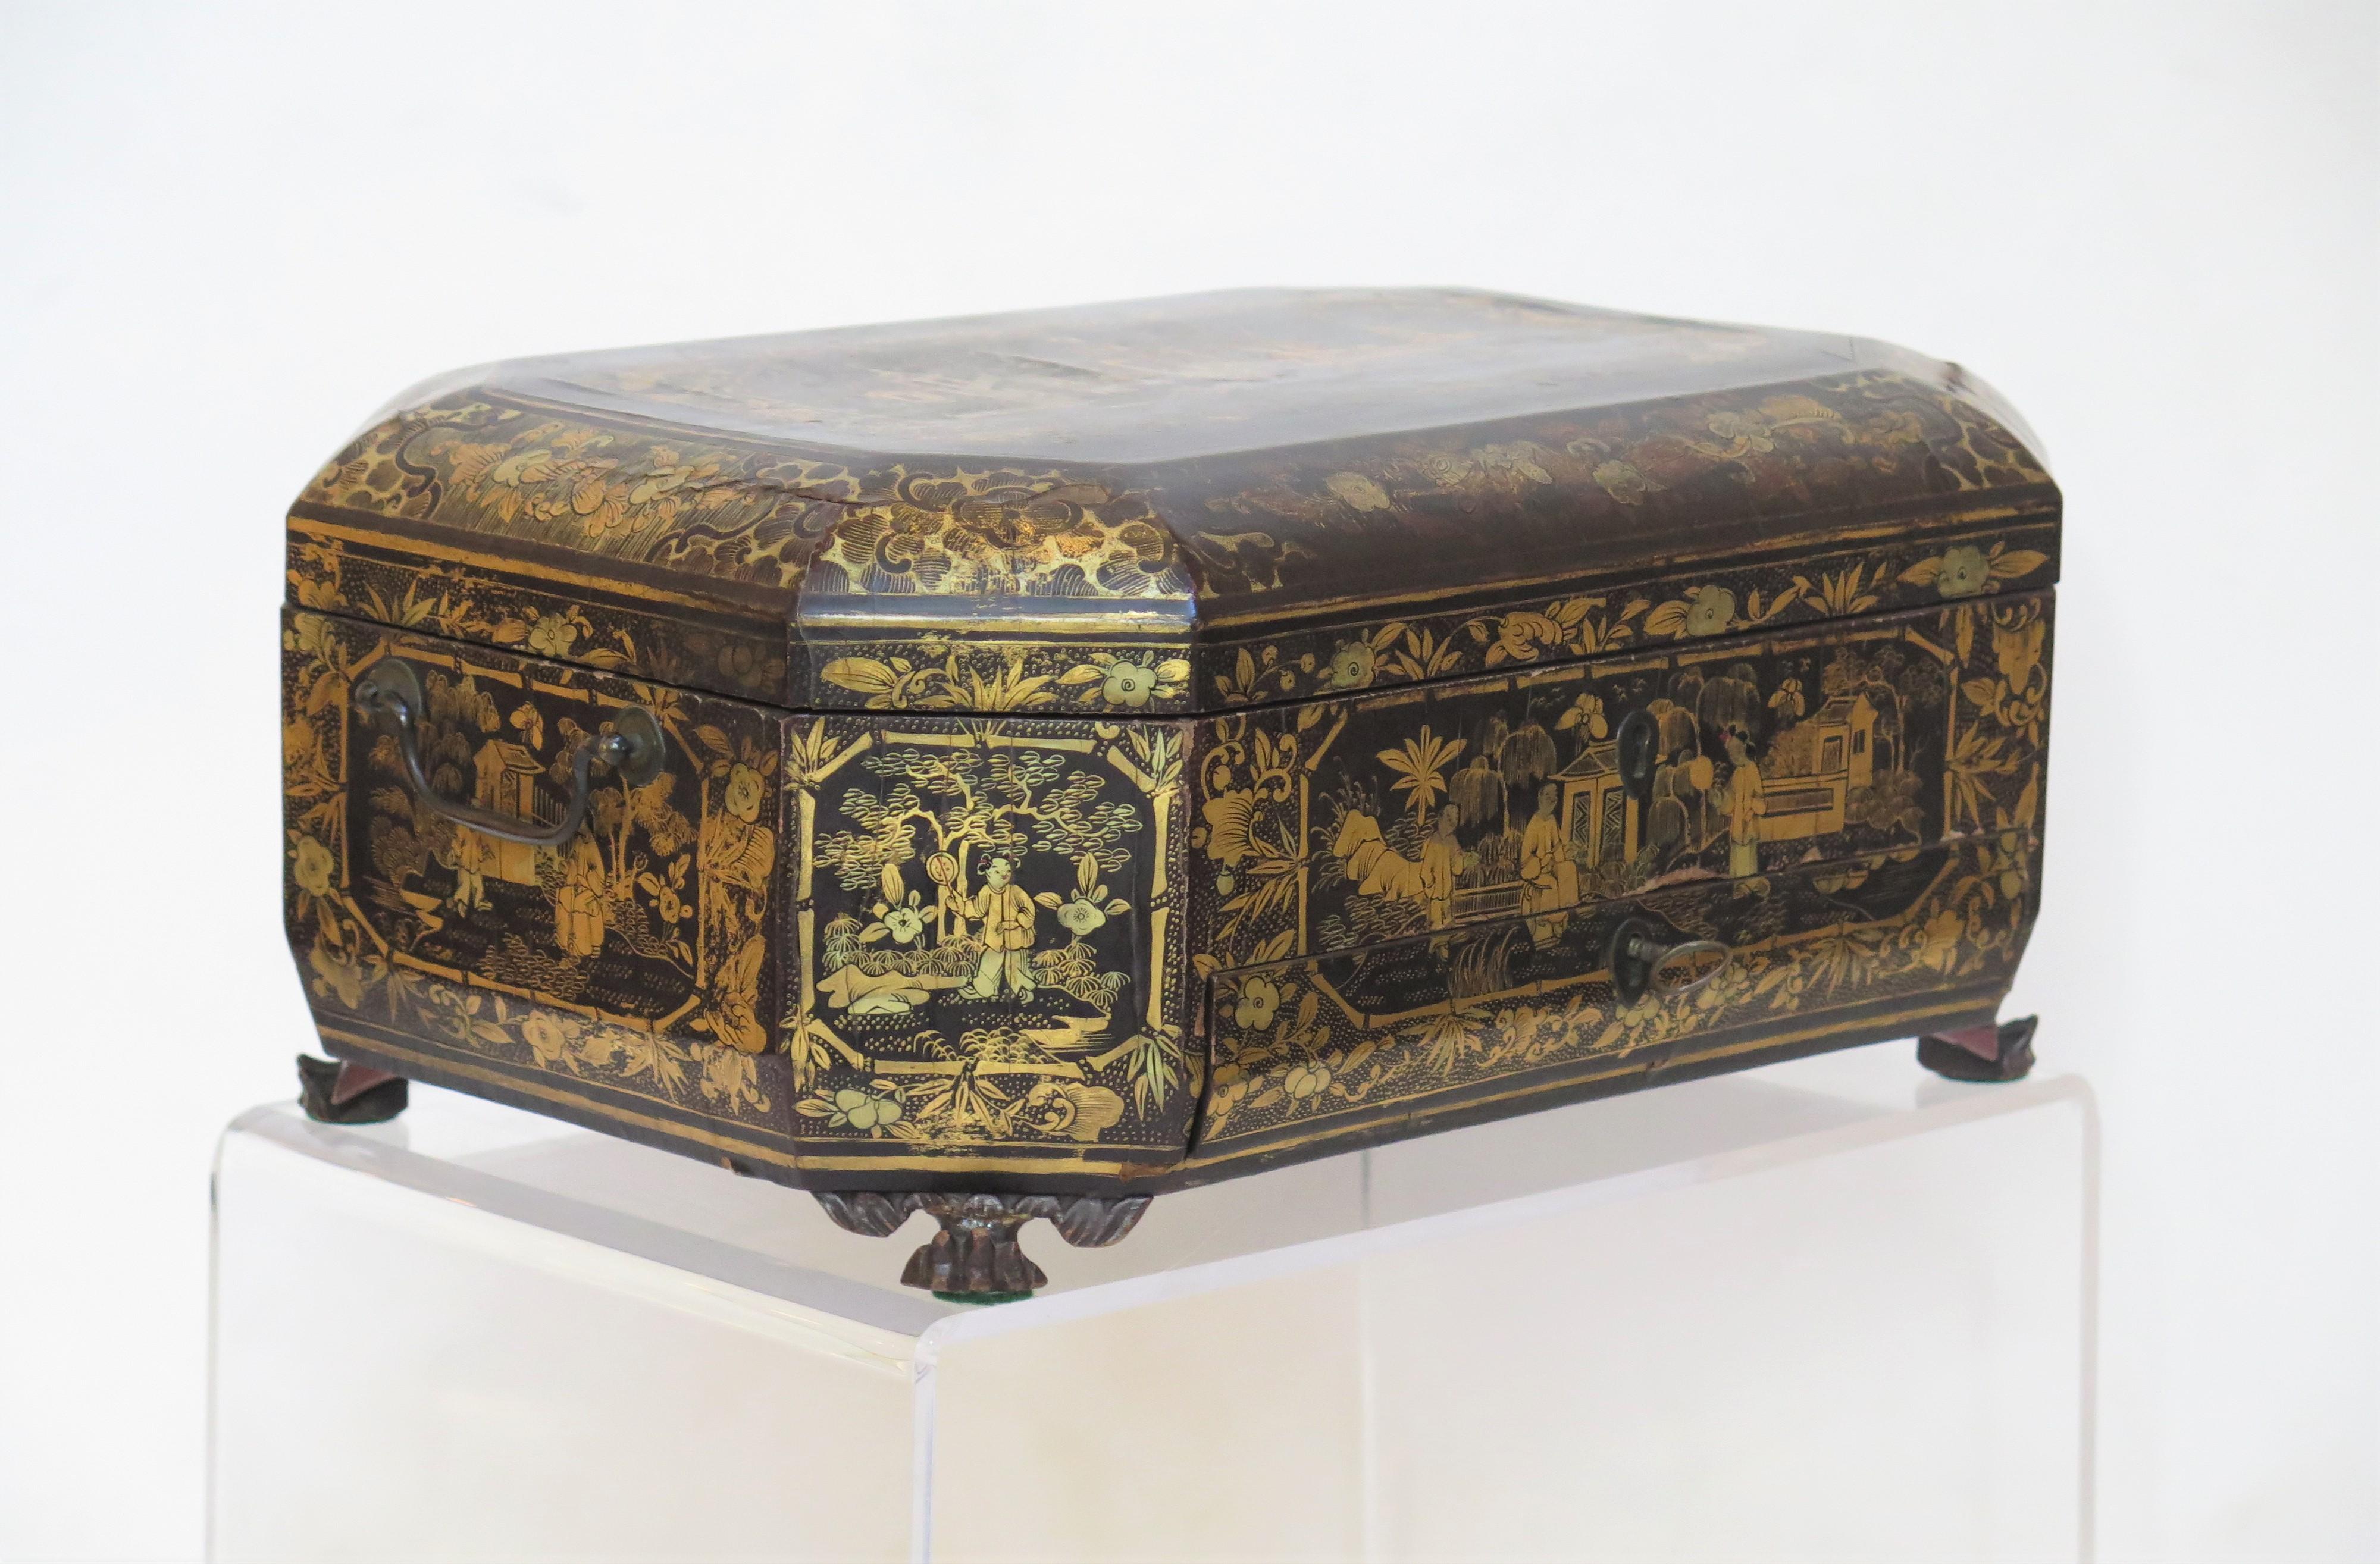 Ealy 19th Century chinese export lacquer sewing box, octagonal shape with feet, black lacquer with gilt decoration, worn on top. 